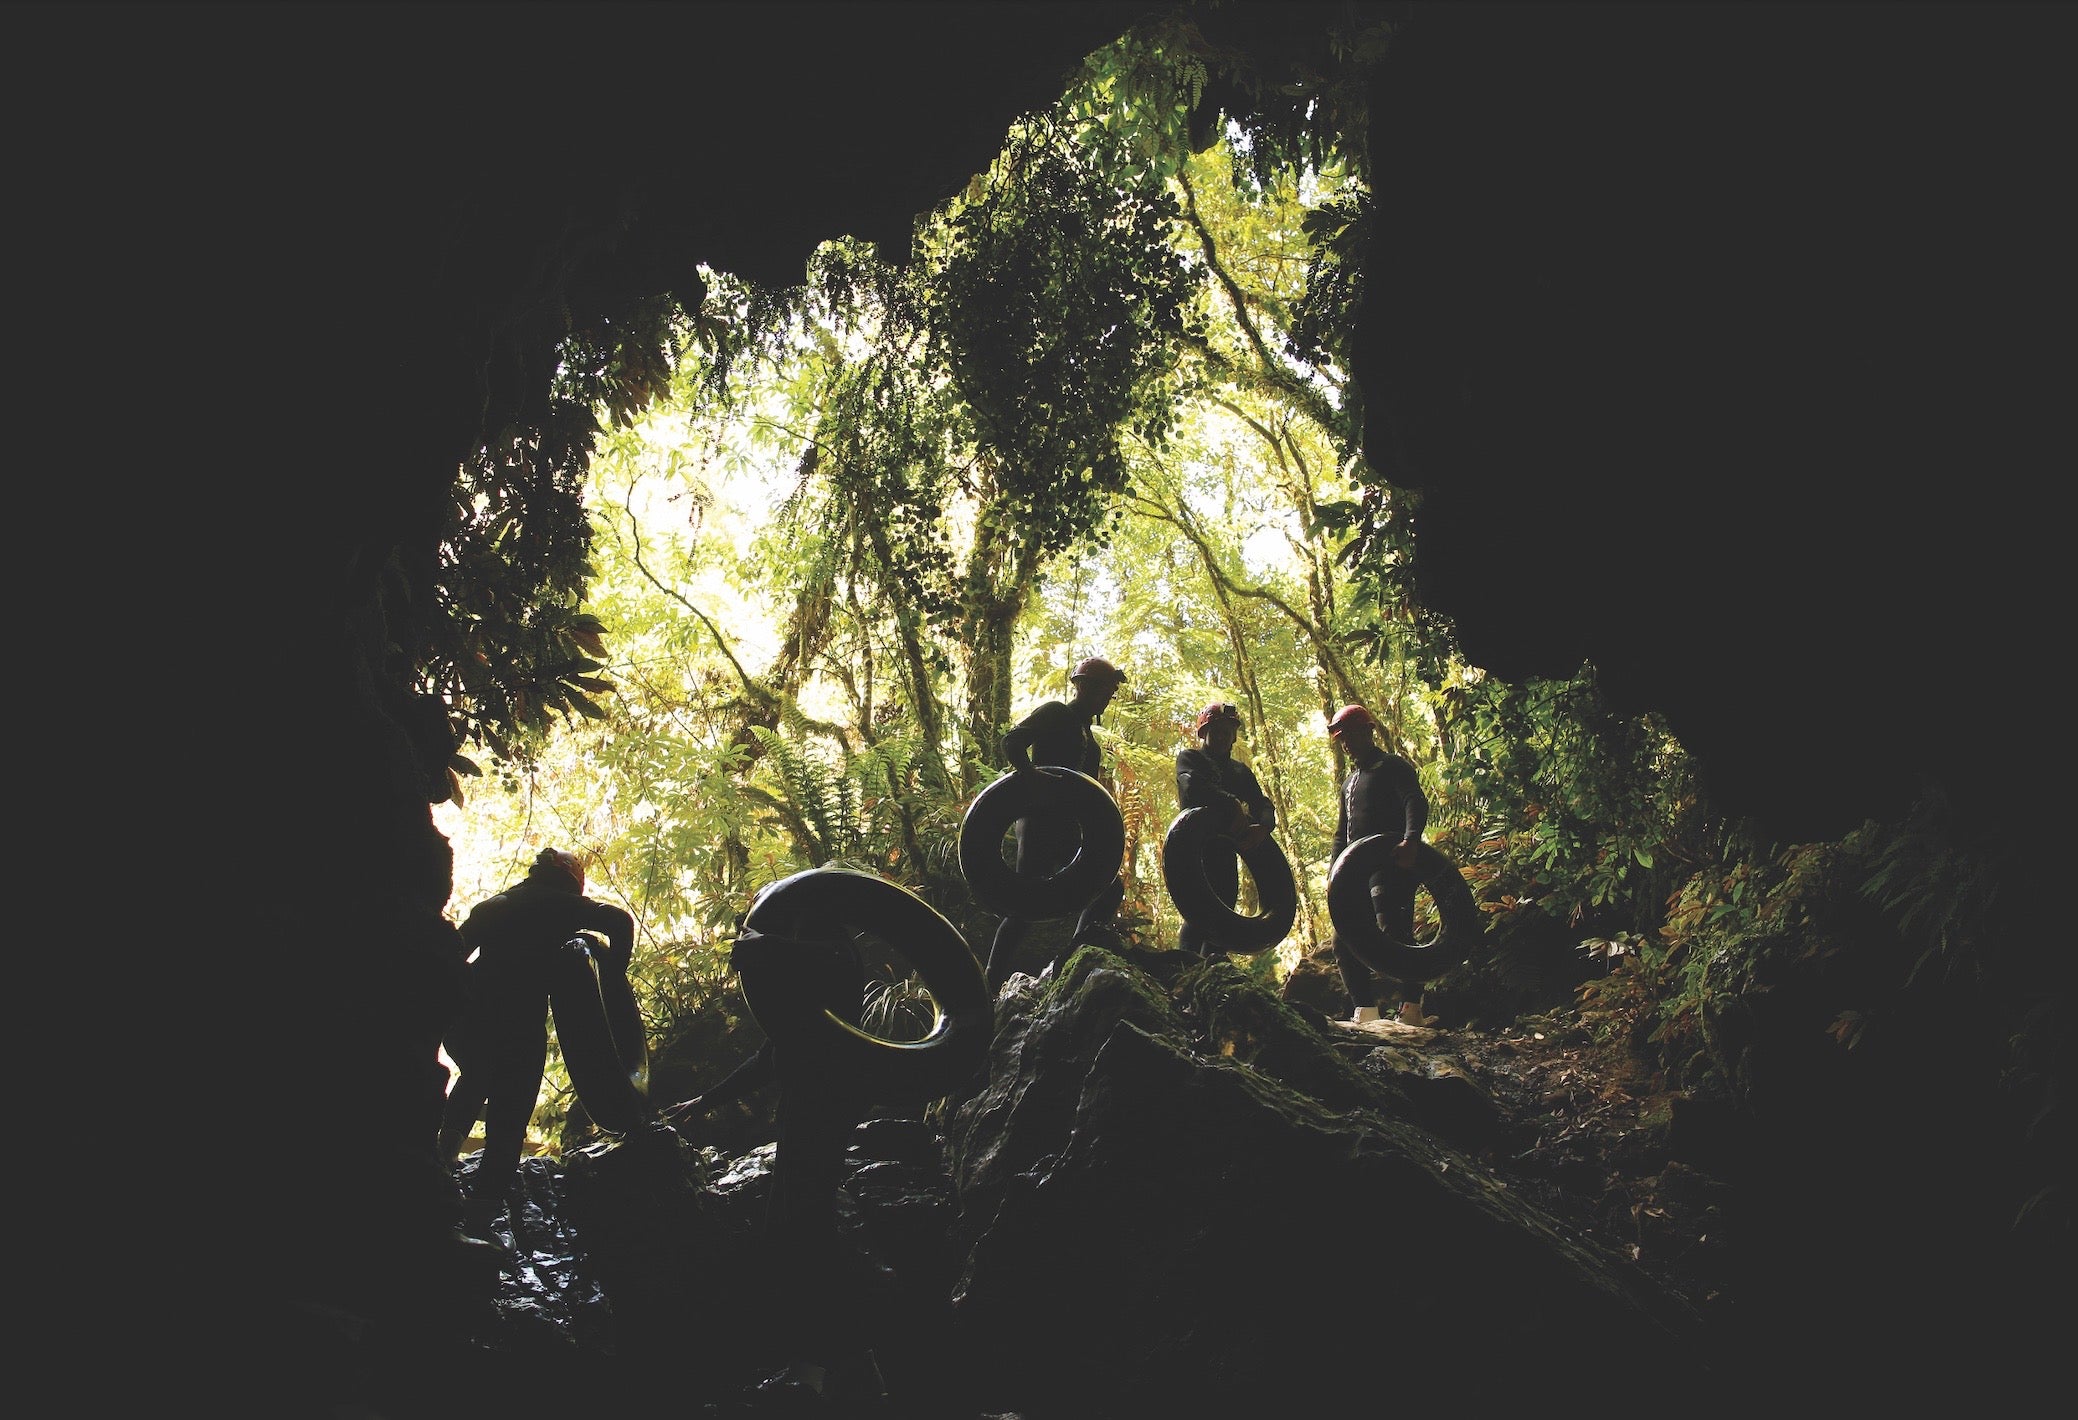 A group of explorers carry inner tubes and stand in the mouth of a cave